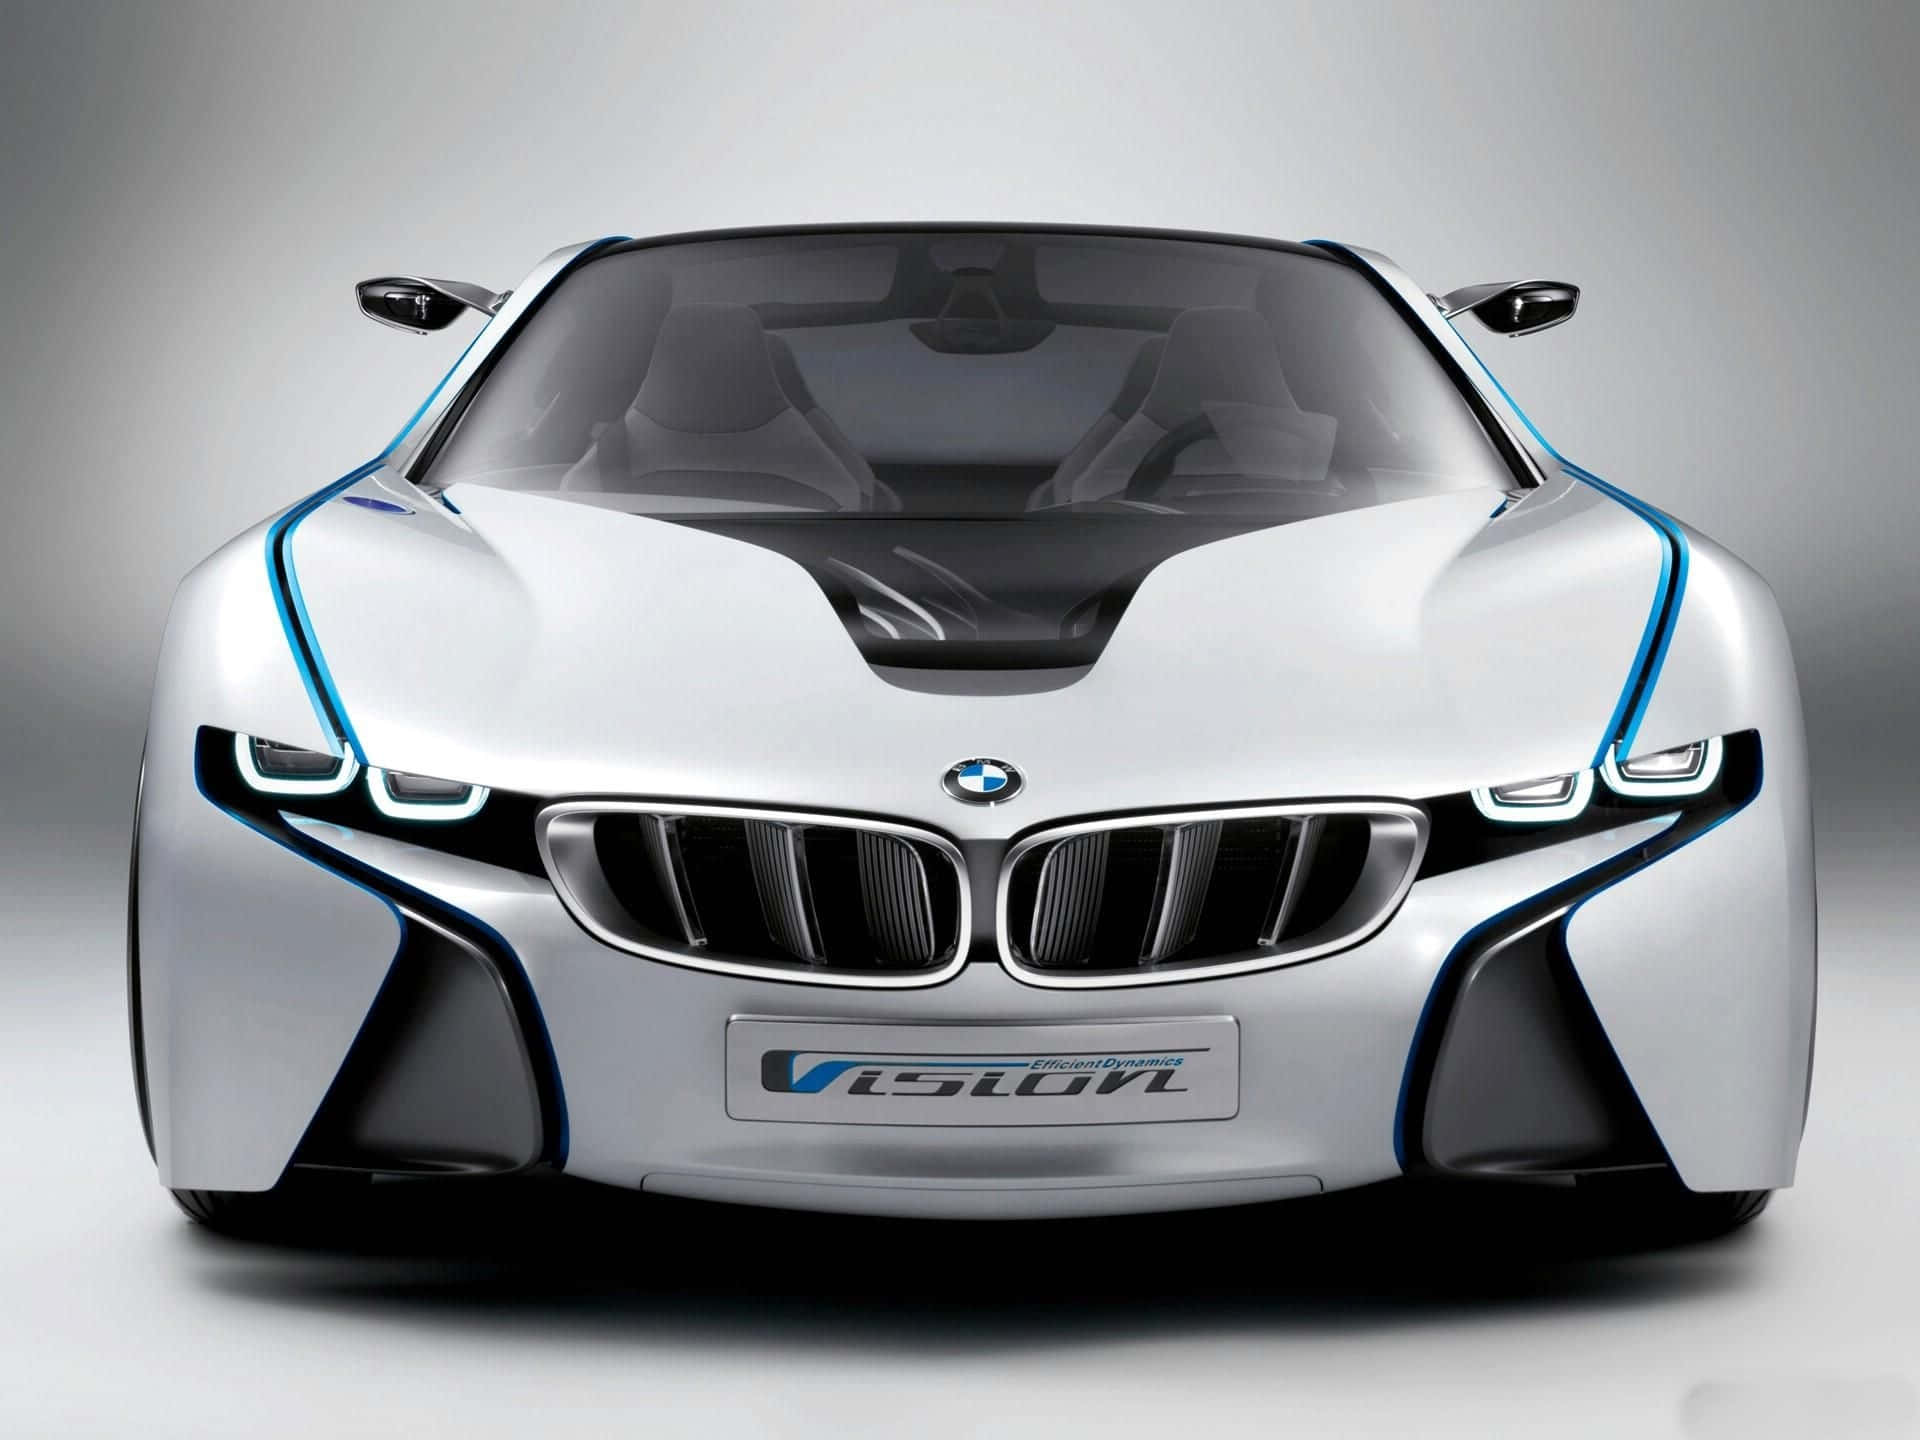 Enjoy The Iconic And Luxury Bmw Experience